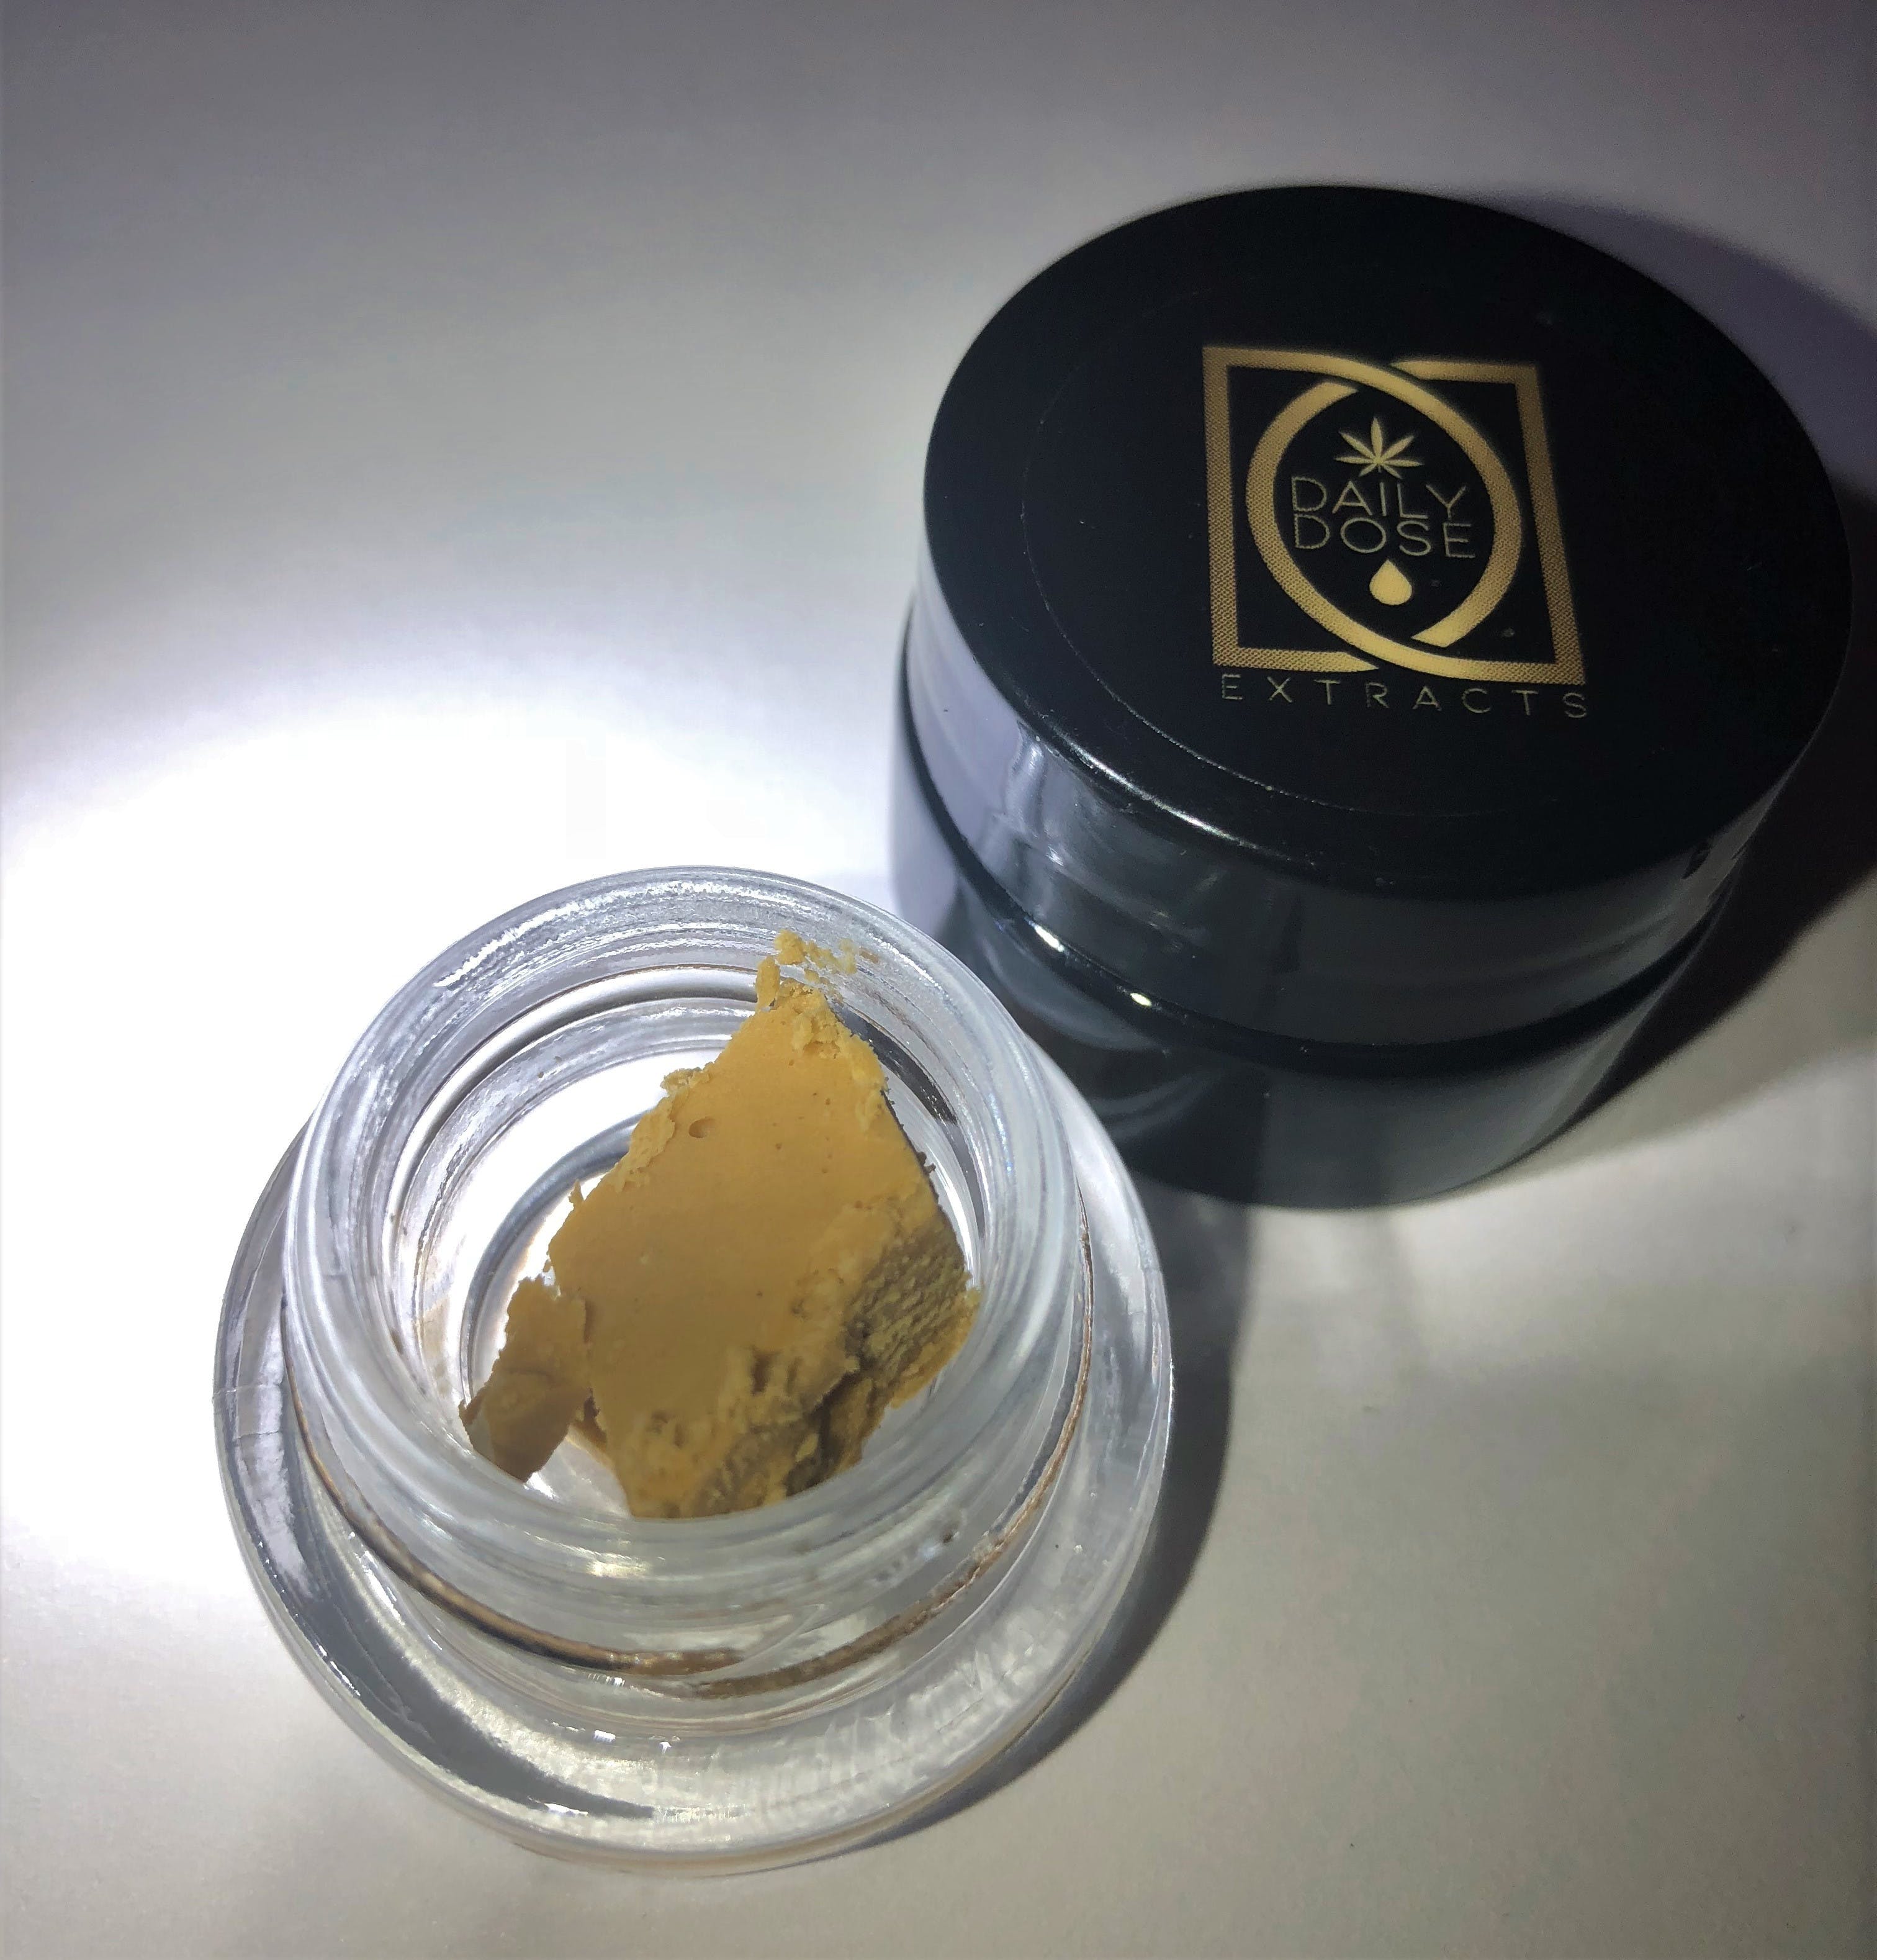 concentrate-daily-dose-extracts-dr-k-crumble